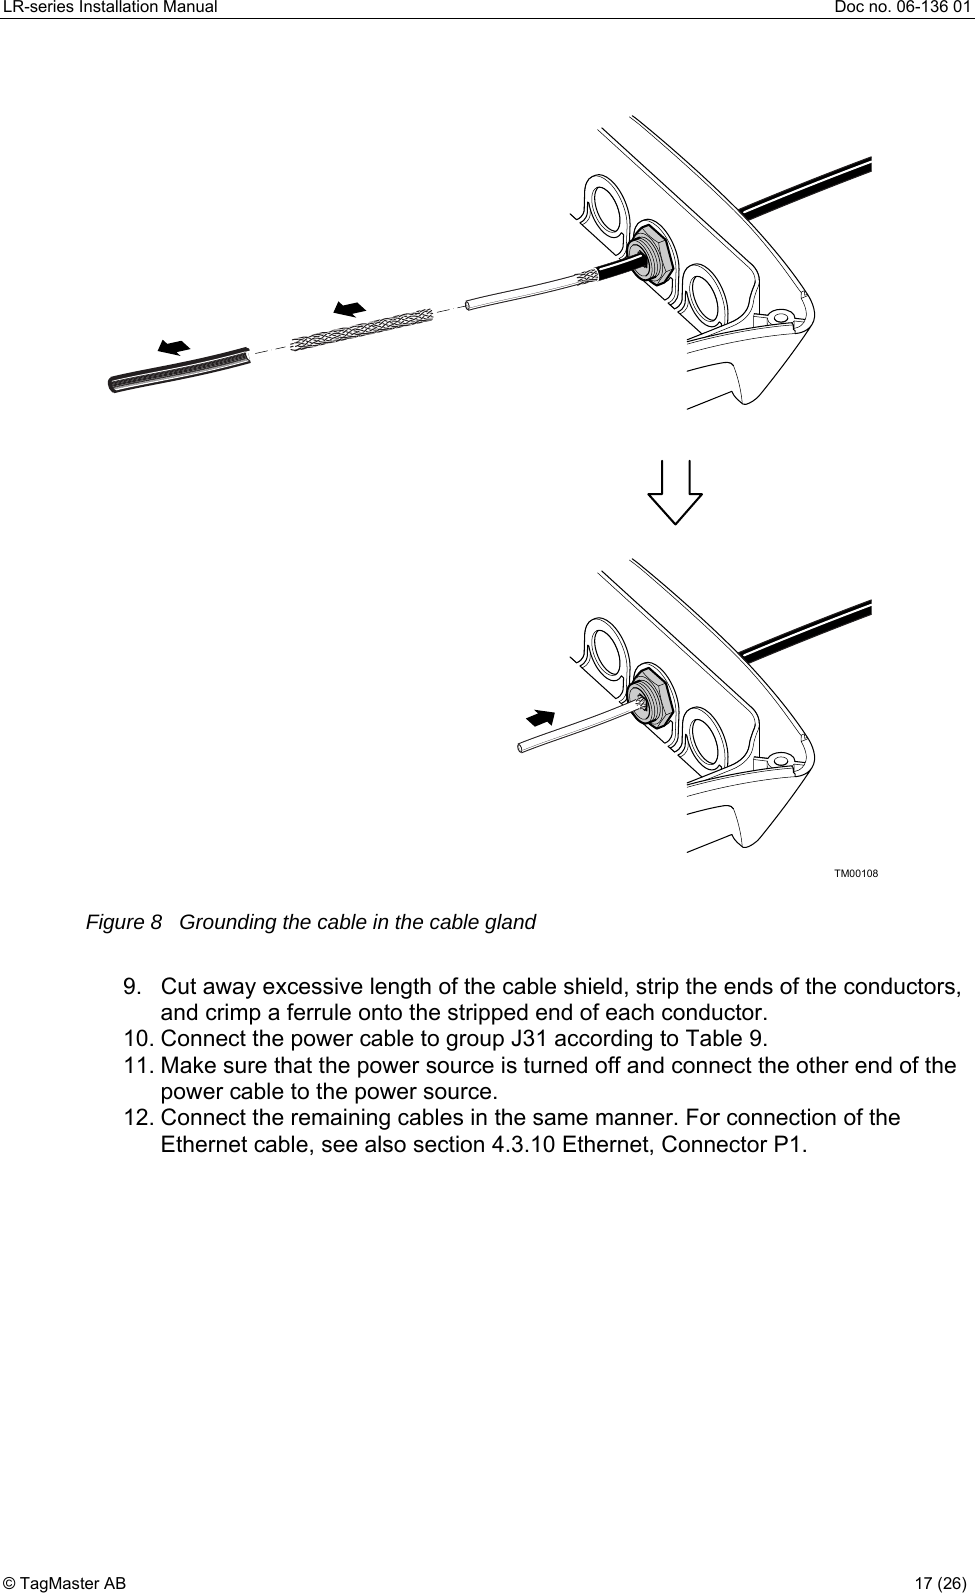 LR-series Installation Manual  Doc no. 06-136 01 TM00108  Figure 8   Grounding the cable in the cable gland  9.  Cut away excessive length of the cable shield, strip the ends of the conductors, and crimp a ferrule onto the stripped end of each conductor. 10. Connect the power cable to group J31 according to Table 9. 11. Make sure that the power source is turned off and connect the other end of the power cable to the power source.  12. Connect the remaining cables in the same manner. For connection of the Ethernet cable, see also section 4.3.10 Ethernet, Connector P1.  © TagMaster AB  17 (26)   